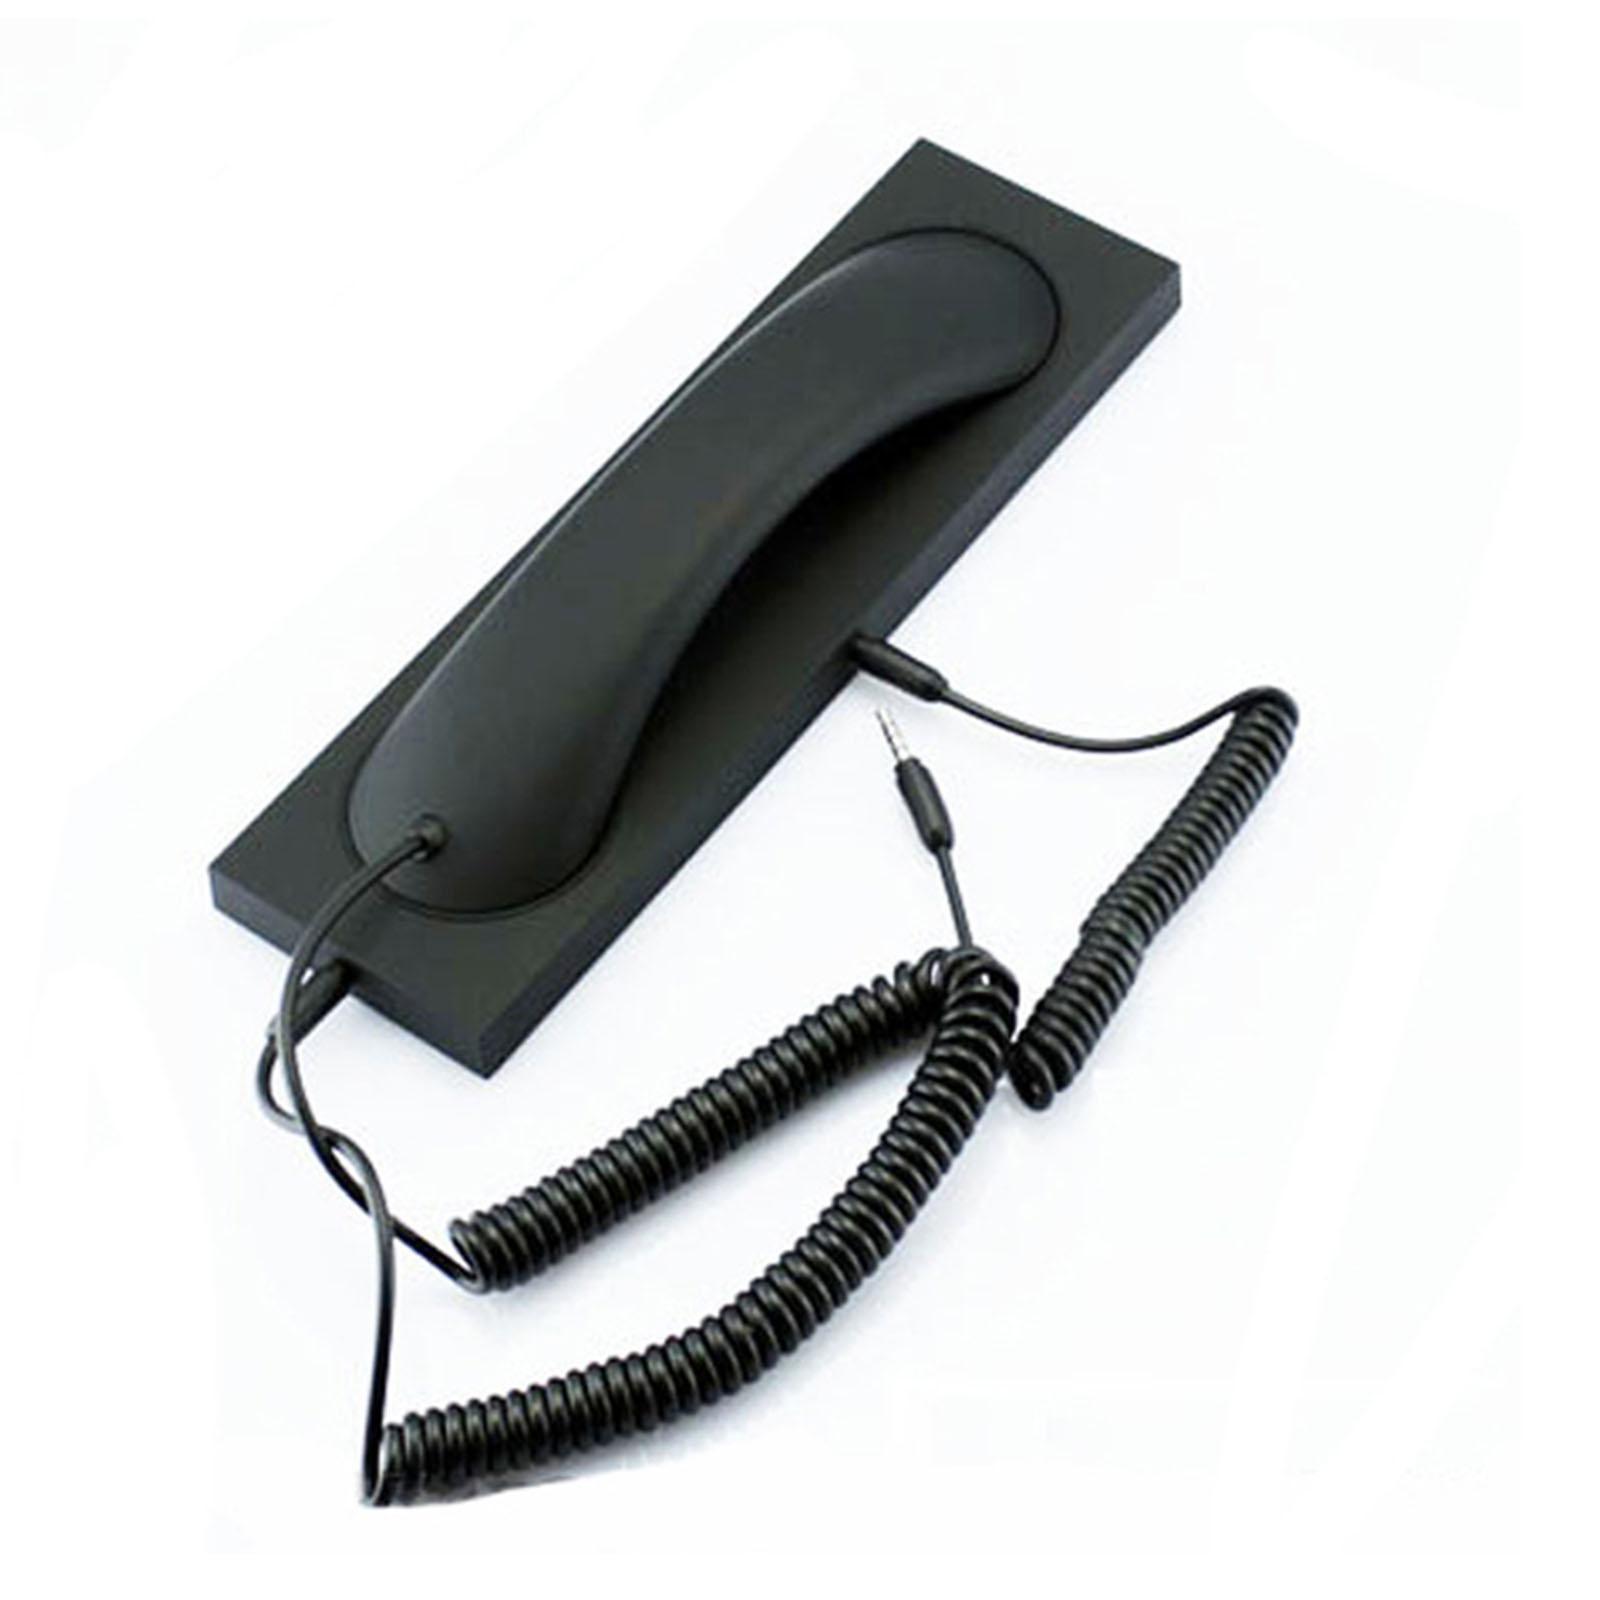 Retro Phone Handset Headset Comfortable Call Fashion for iPhone Smartphones